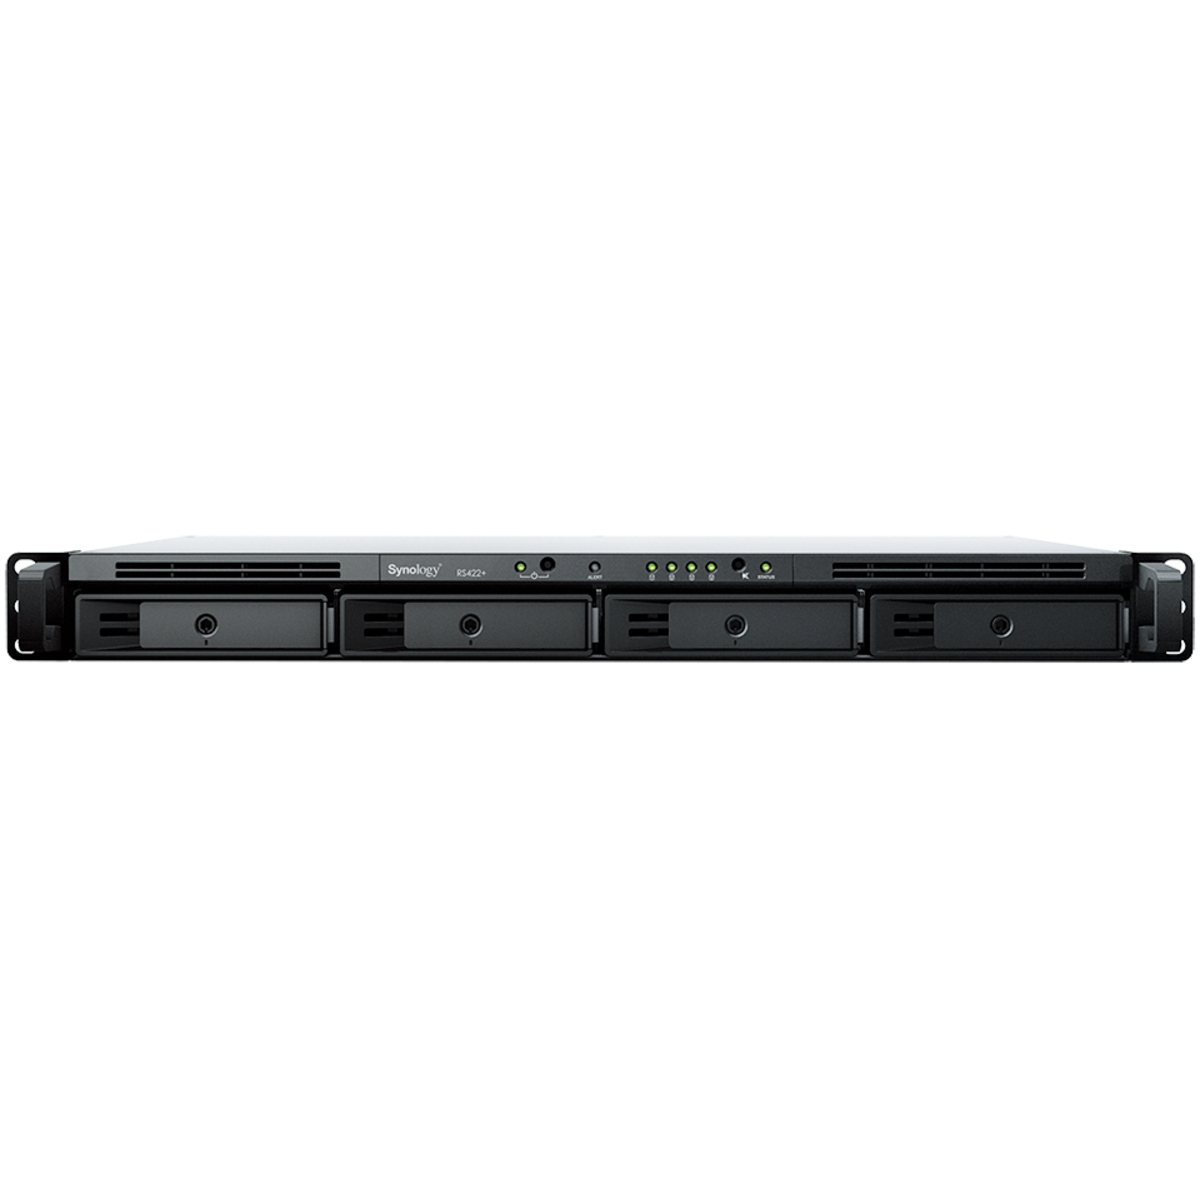 buy Synology RackStation RS422+ 16tb RackMount NAS - Network Attached Storage Device 4x4000gb Toshiba MN Series MN08ADA400E 3.5 7200rpm SATA 6Gb/s HDD NAS Class Drives Installed - Burn-In Tested - ON SALE - nas headquarters buy network attached storage server device das new raid-5 free shipping simply usa RackStation RS422+